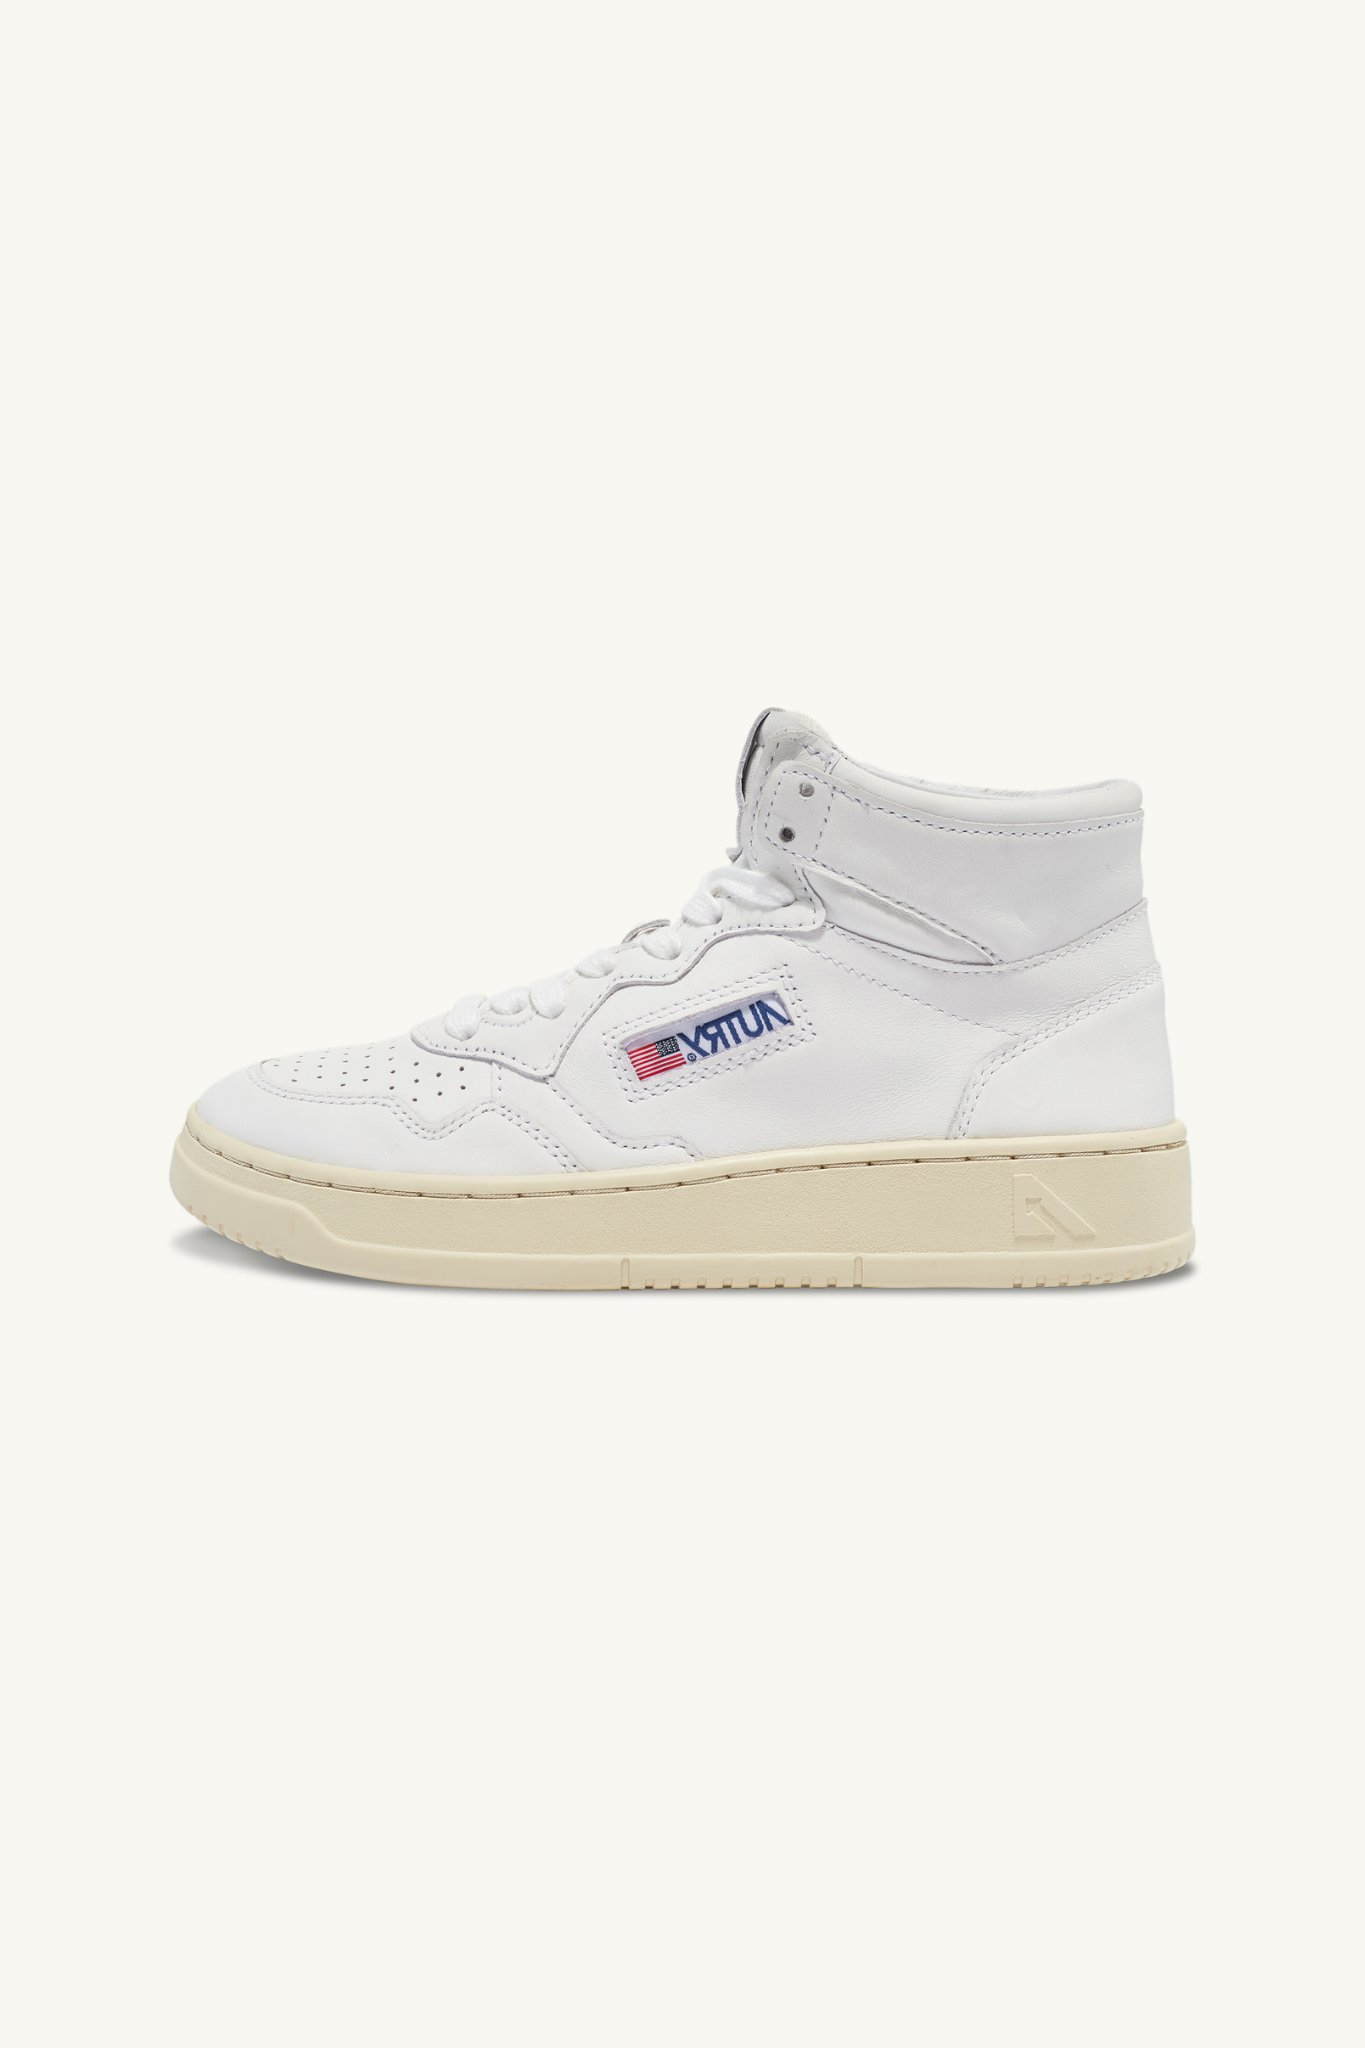 AUMW-GG04 - MEDALIST MID SNEAKERS IN SOFT GOATSKIN COLOR WHITE